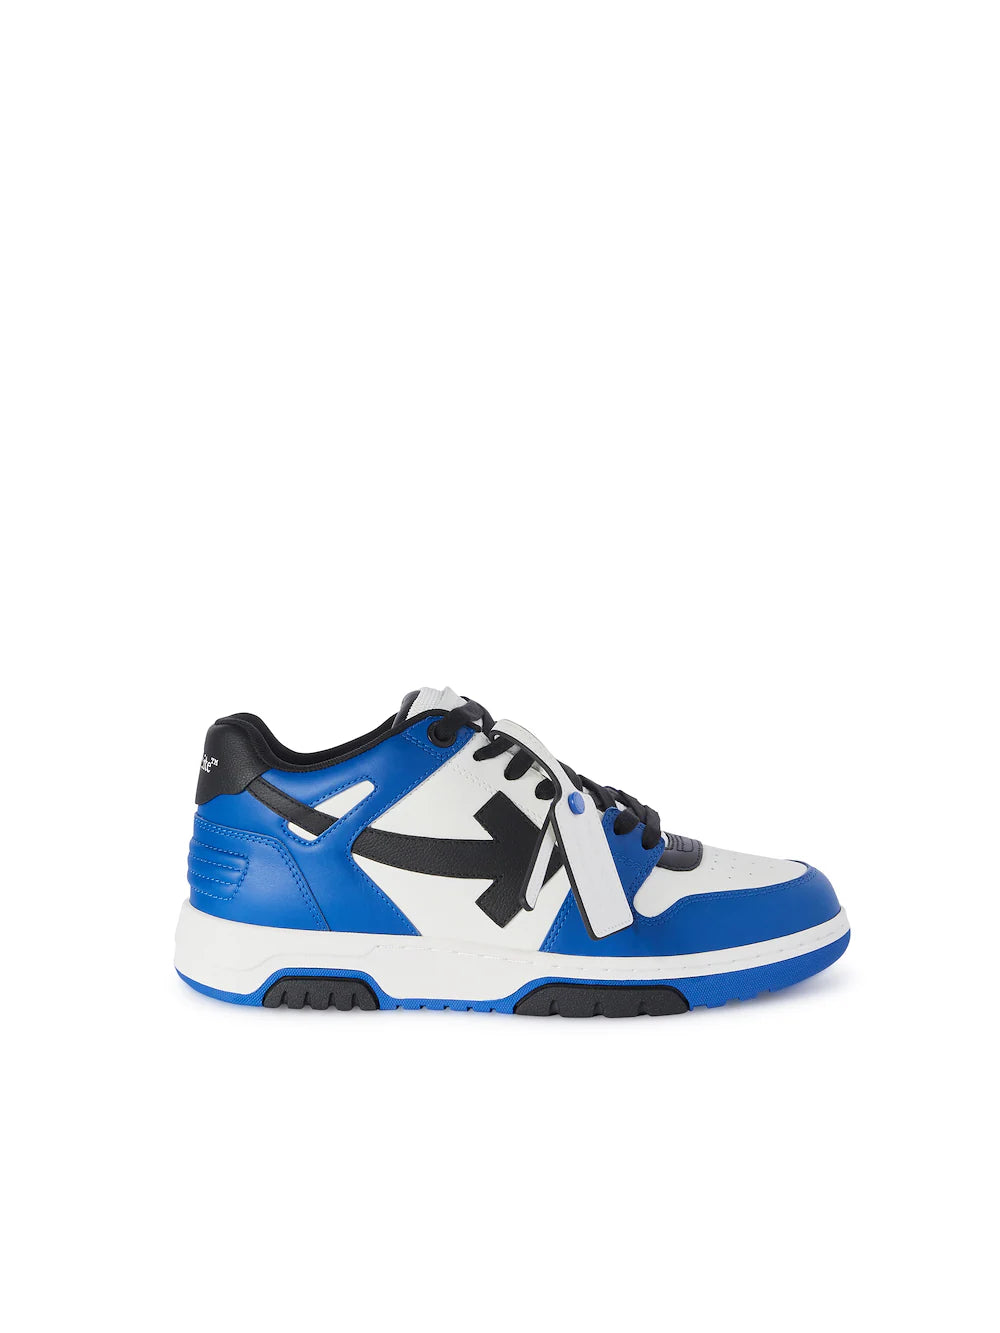 OFF-WHITE Sneakers Out Of Office Blu Reale/Nero